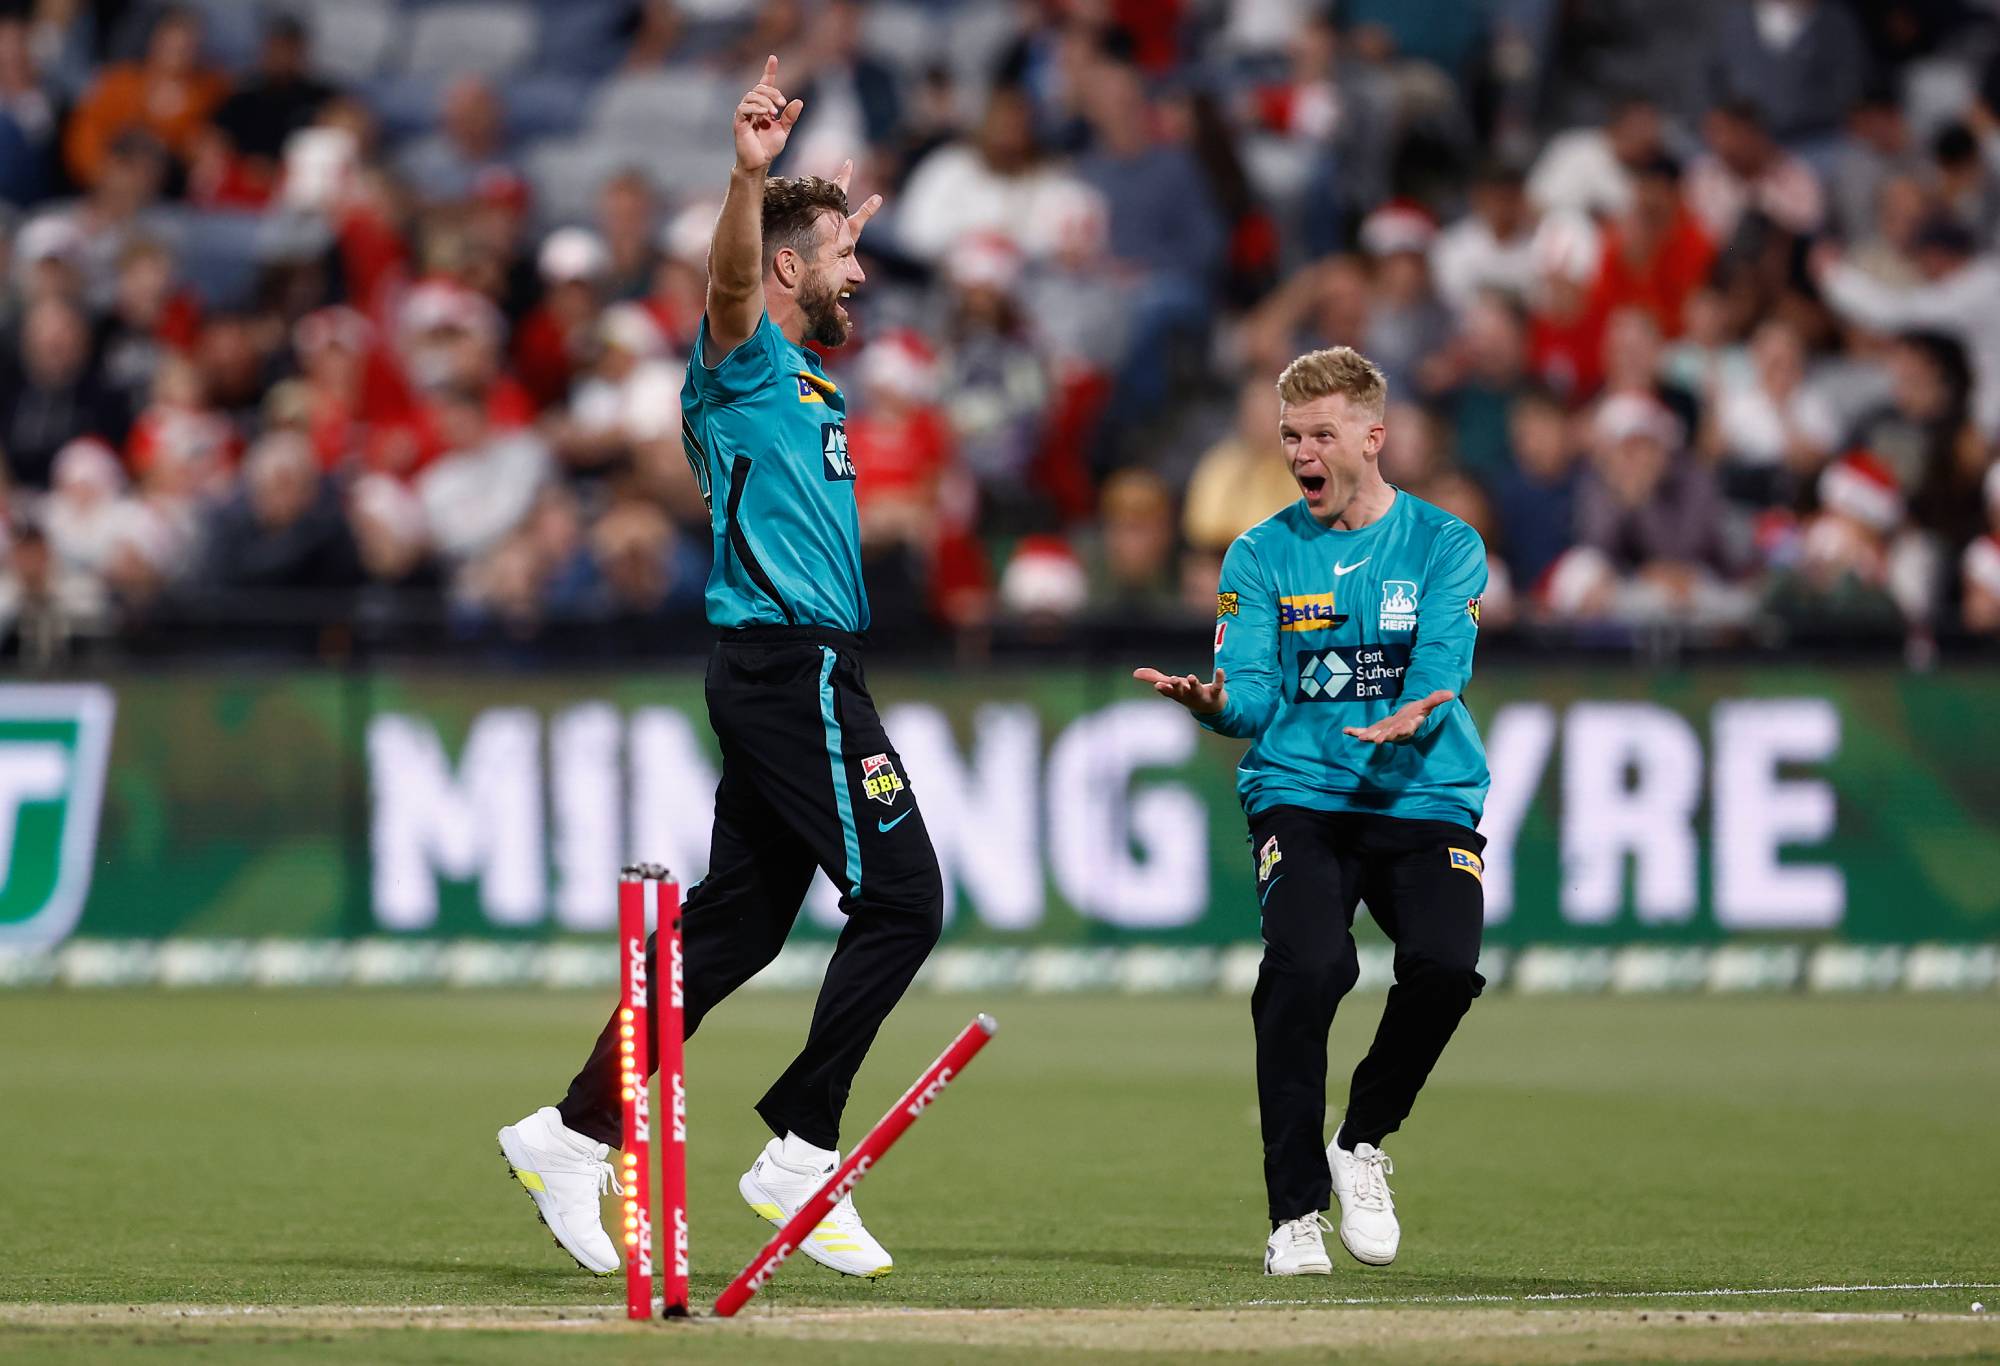 GEELONG, AUSTRALIA - DECEMBER 21:  Michael Neser of the Heat celebrates the wicket of Jonathan Wells of the Renegades during the Men's Big Bash League match between the Melbourne Renegades and the Brisbane Heat at GMHBA Stadium, on December 21, 2022, in Geelong, Australia. (Photo by Darrian Traynor/Getty Images)